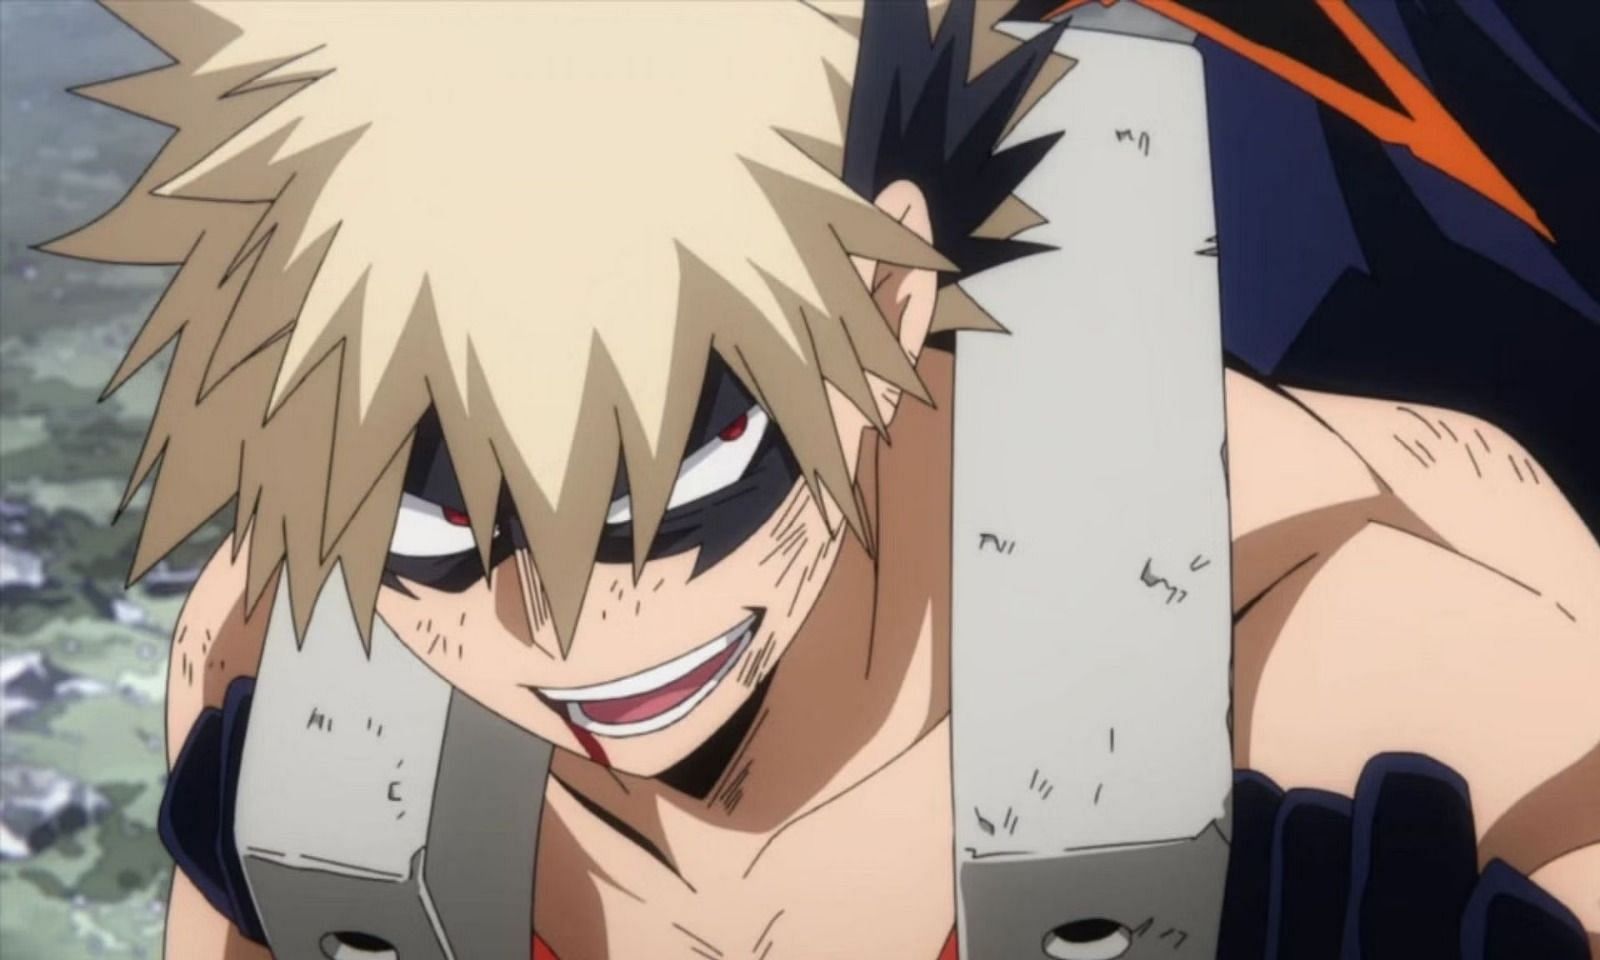 Bakugo is an anime side character who is more famous than the main characters. (image via Studio Bones)